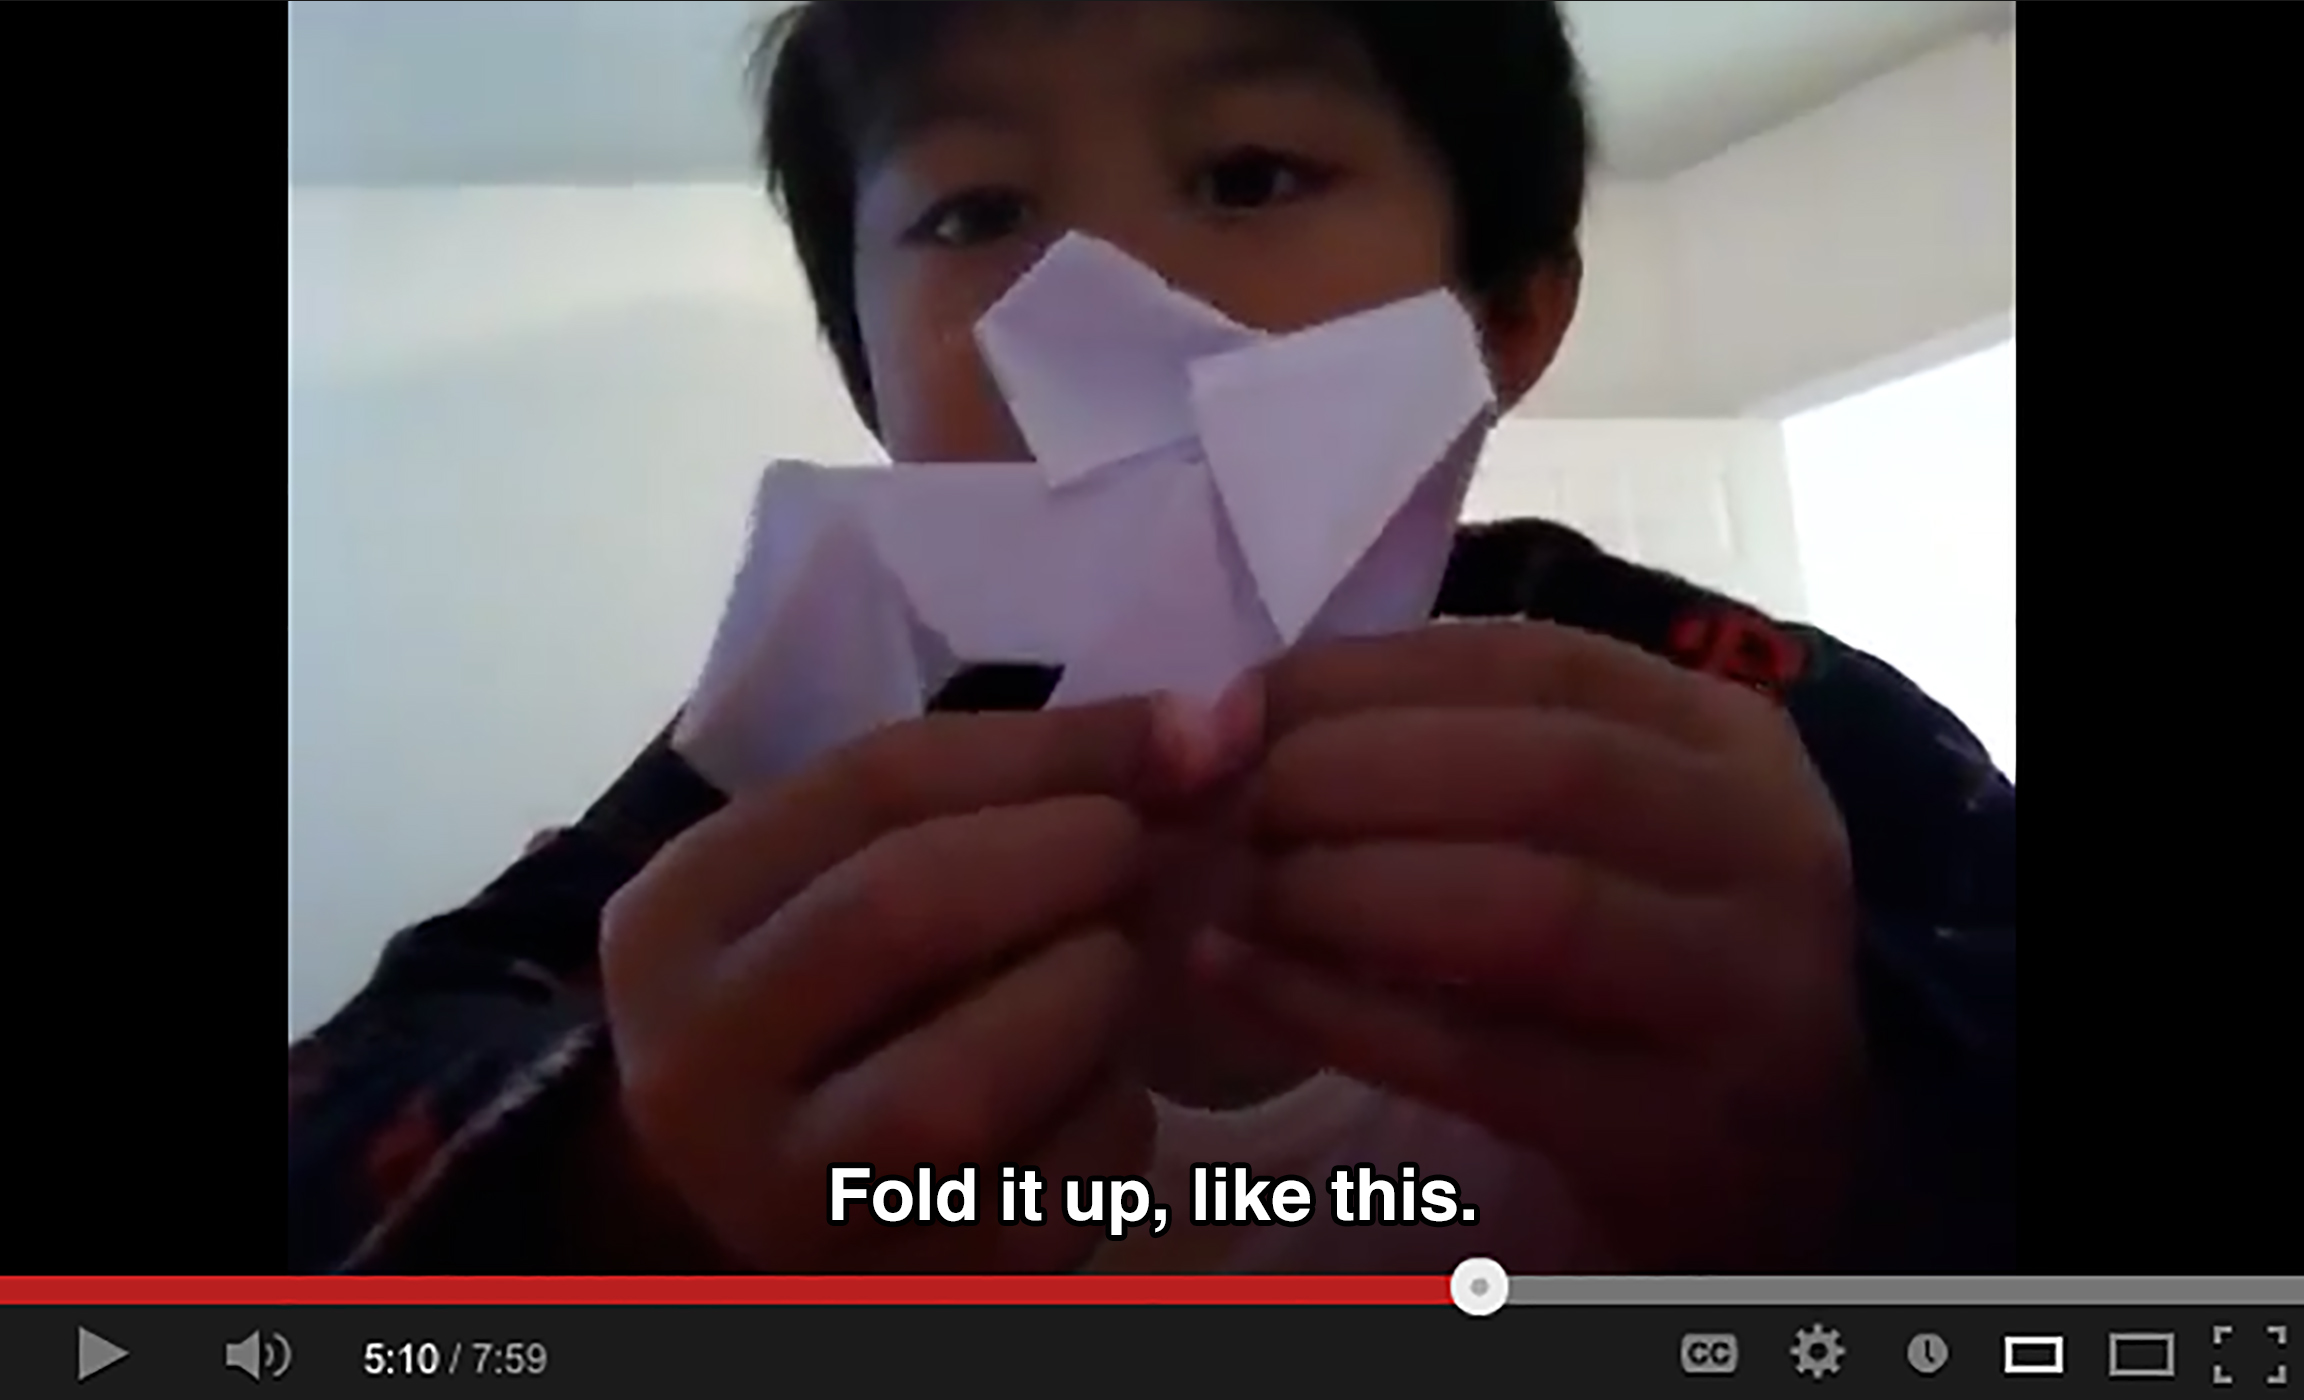 A young boy holds origami up to the camera and says: Fold it up, like this.